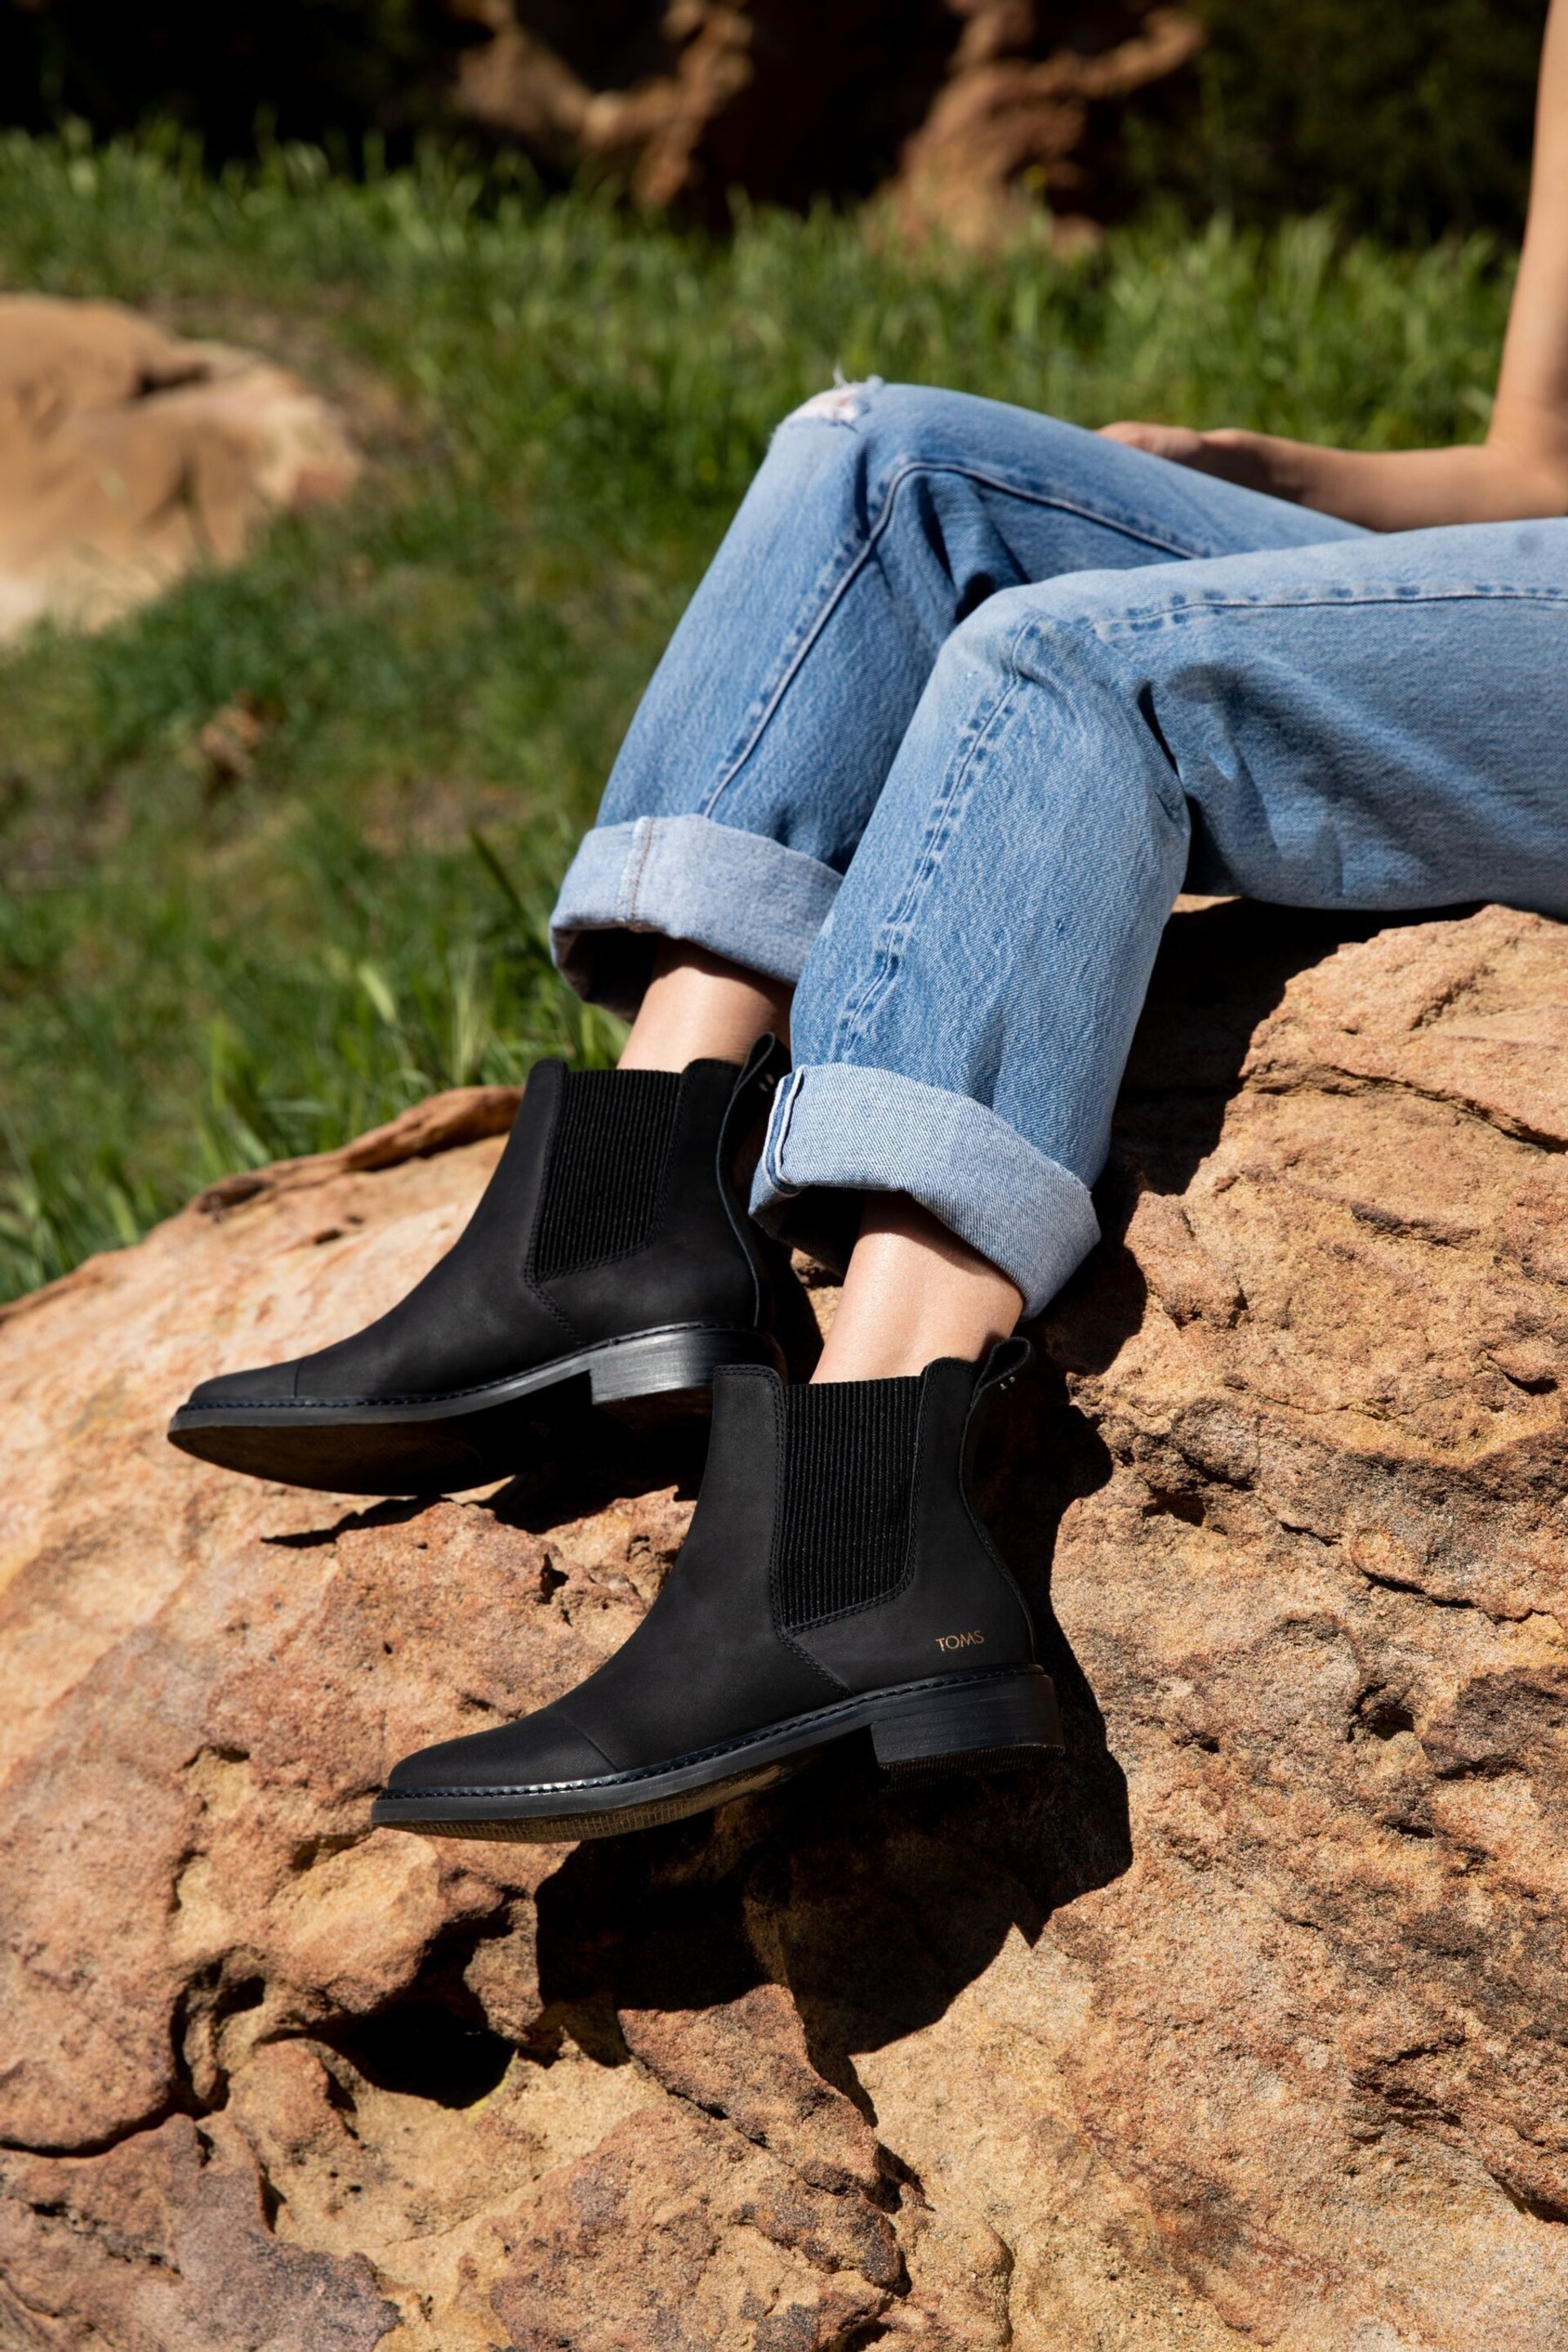 TOMS Charlie Black Leather Chelsea Boots - Image 2 of 11